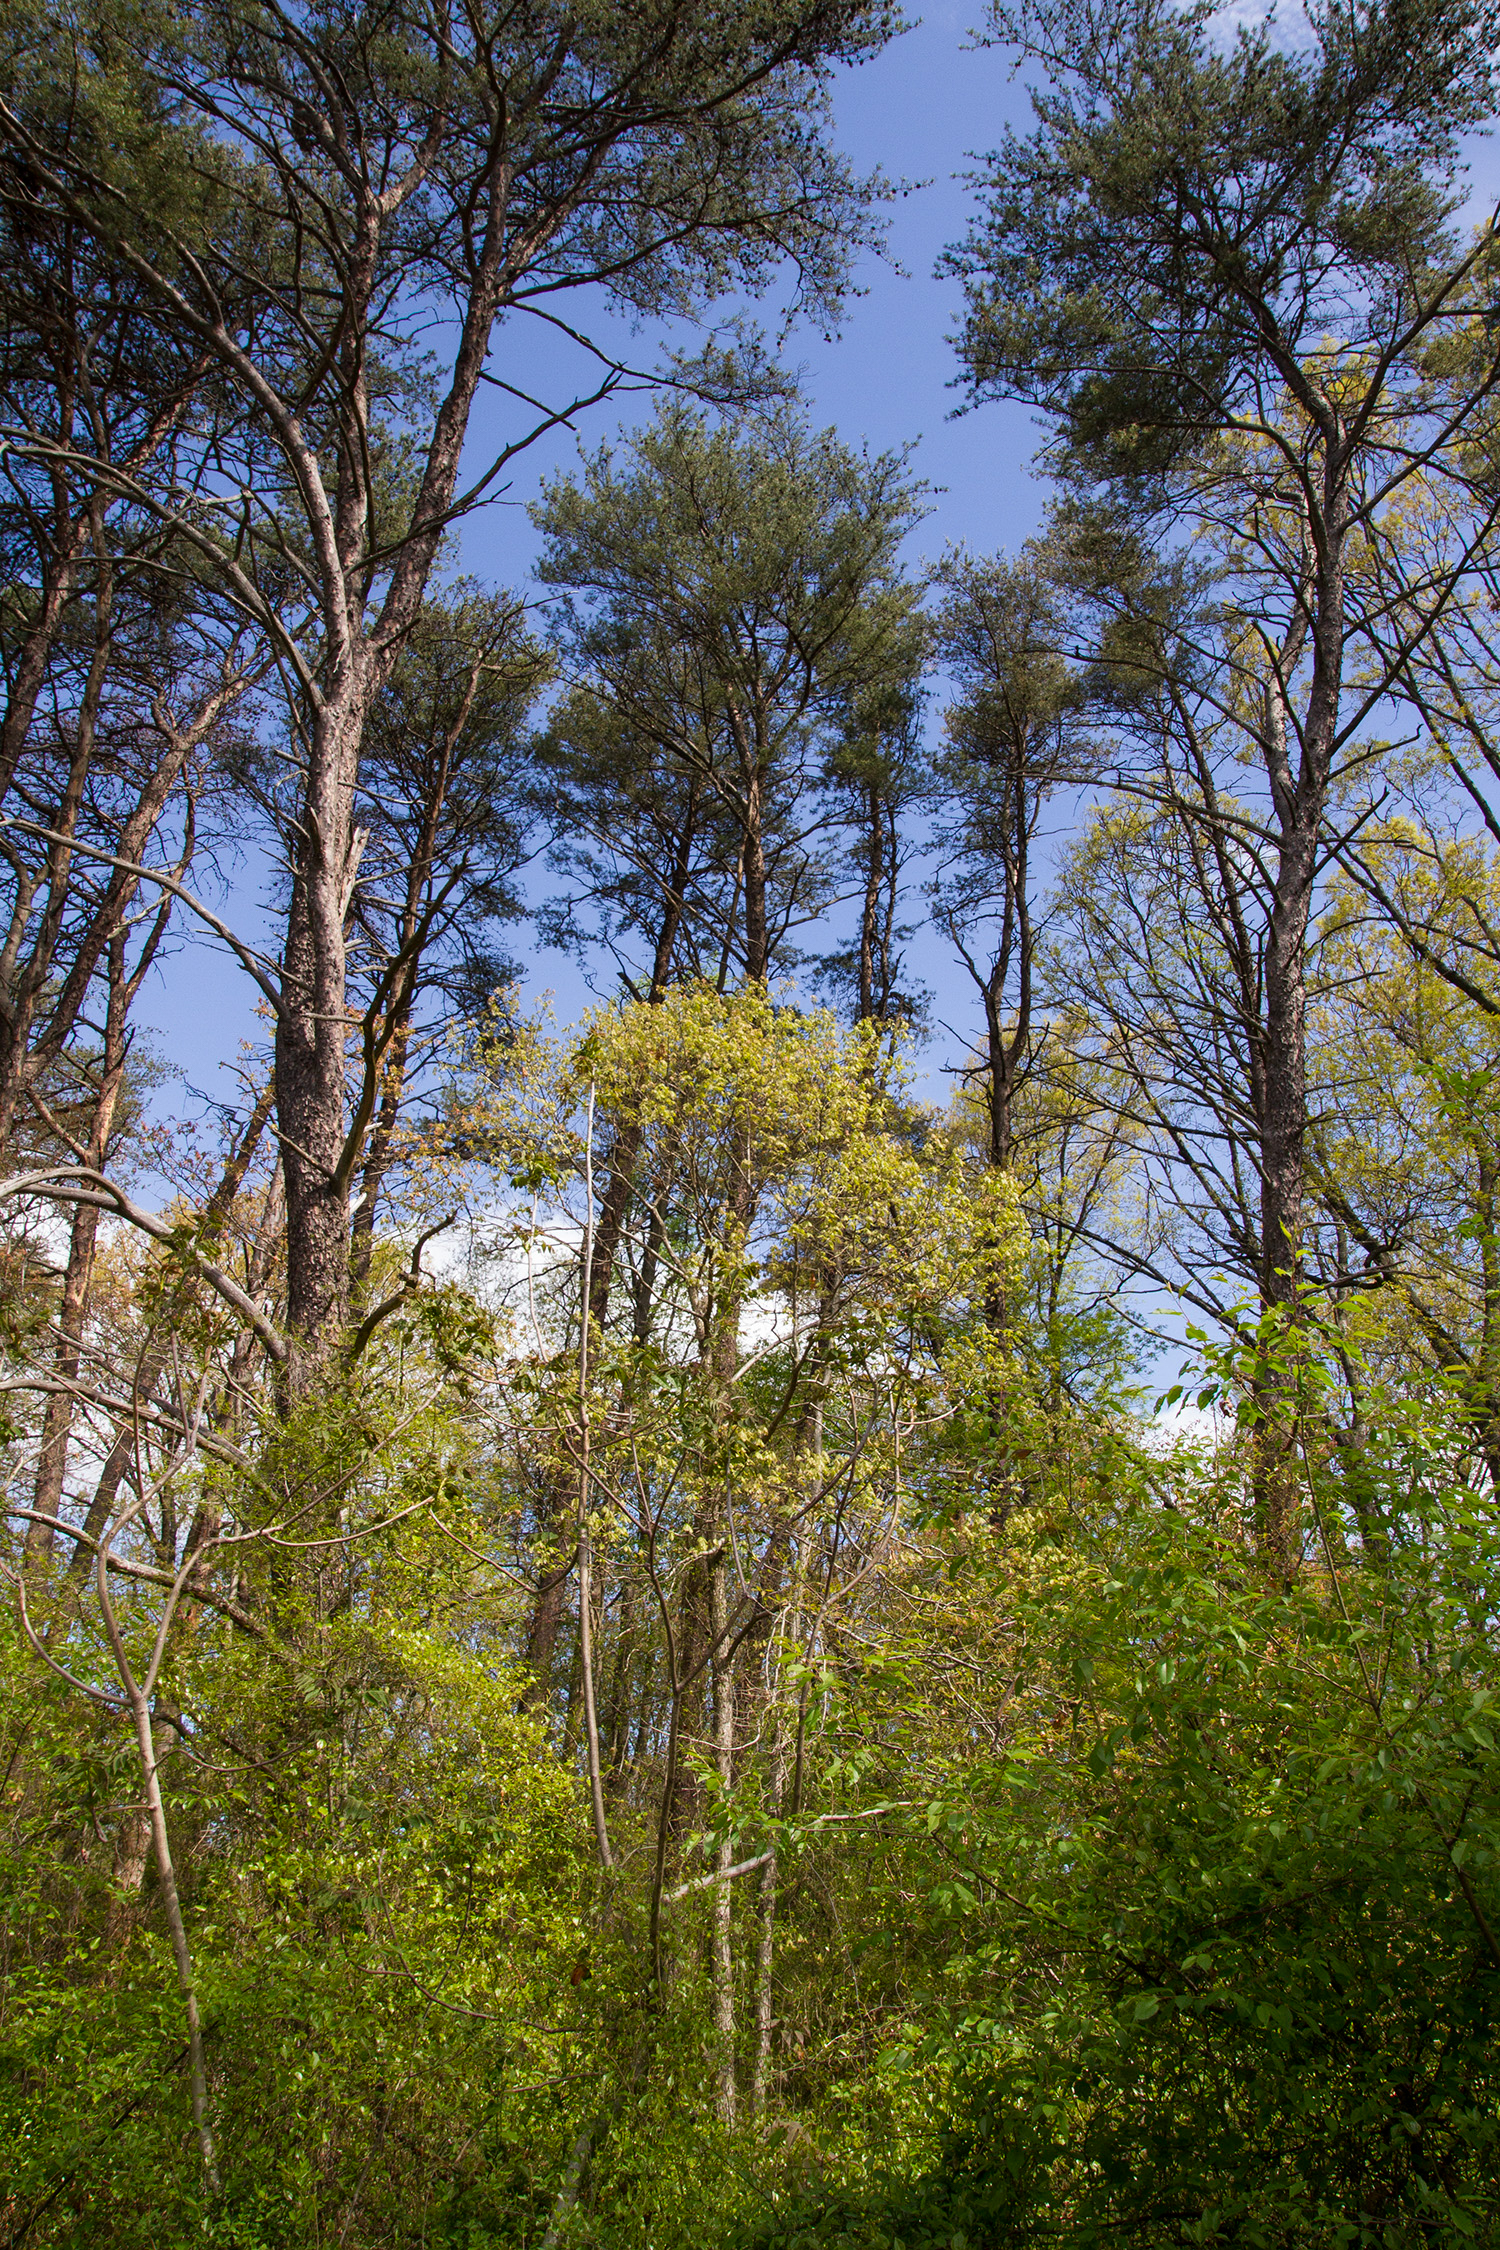 a grassy, forested area is seen on a sunny day